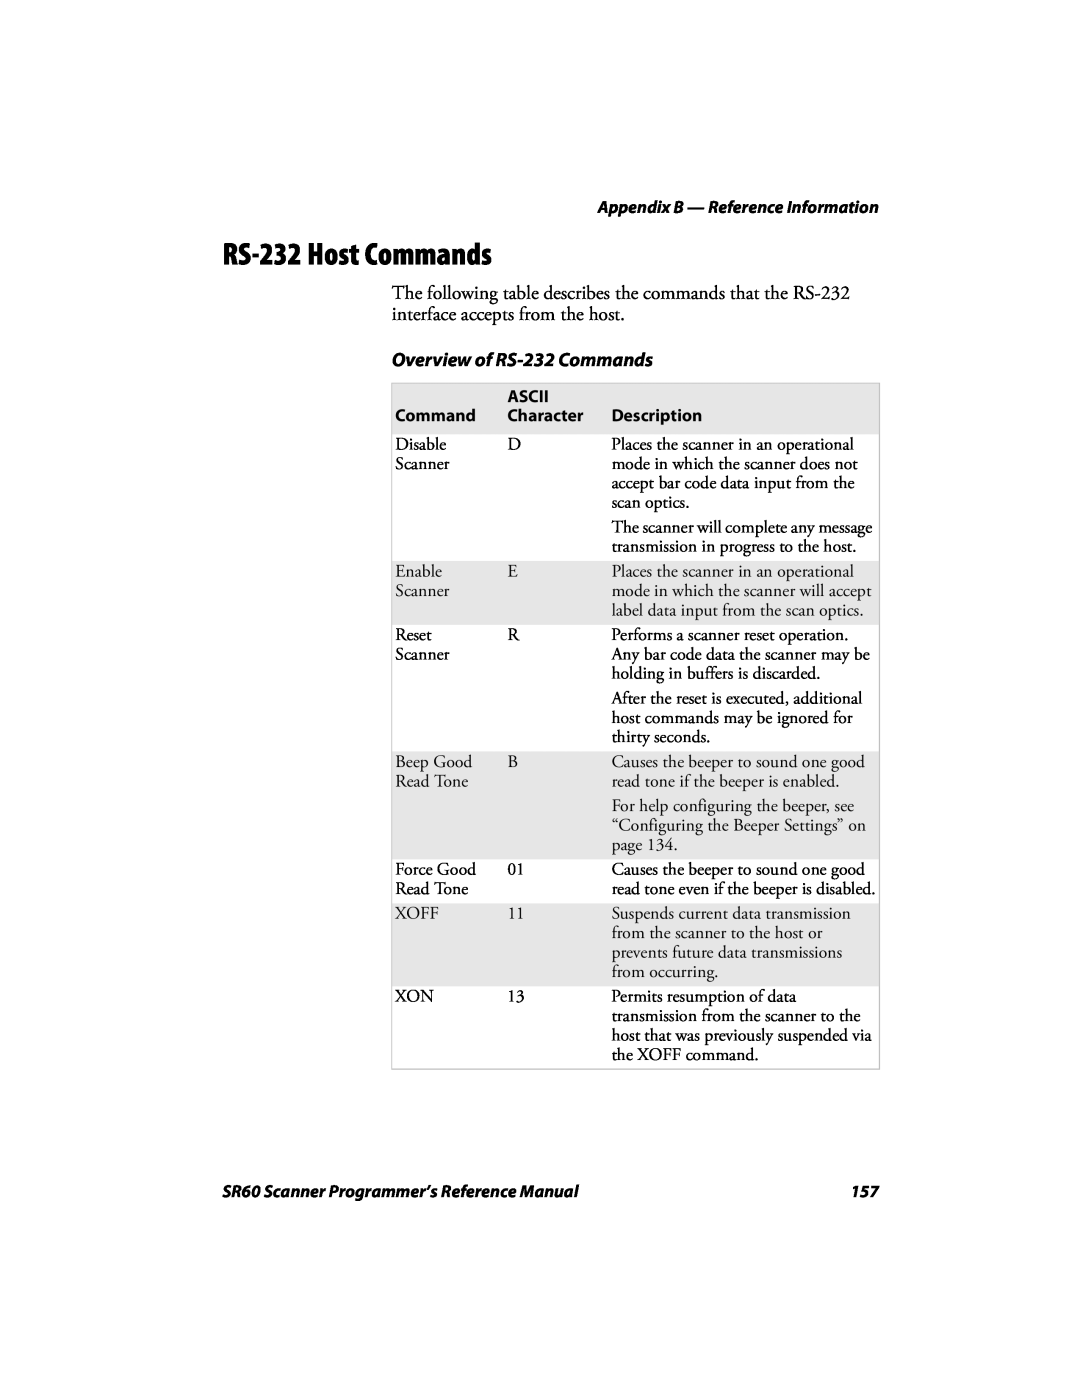 Intermec SR60 manual RS-232 Host Commands, Overview of RS-232 Commands, Appendix B - Reference Information 